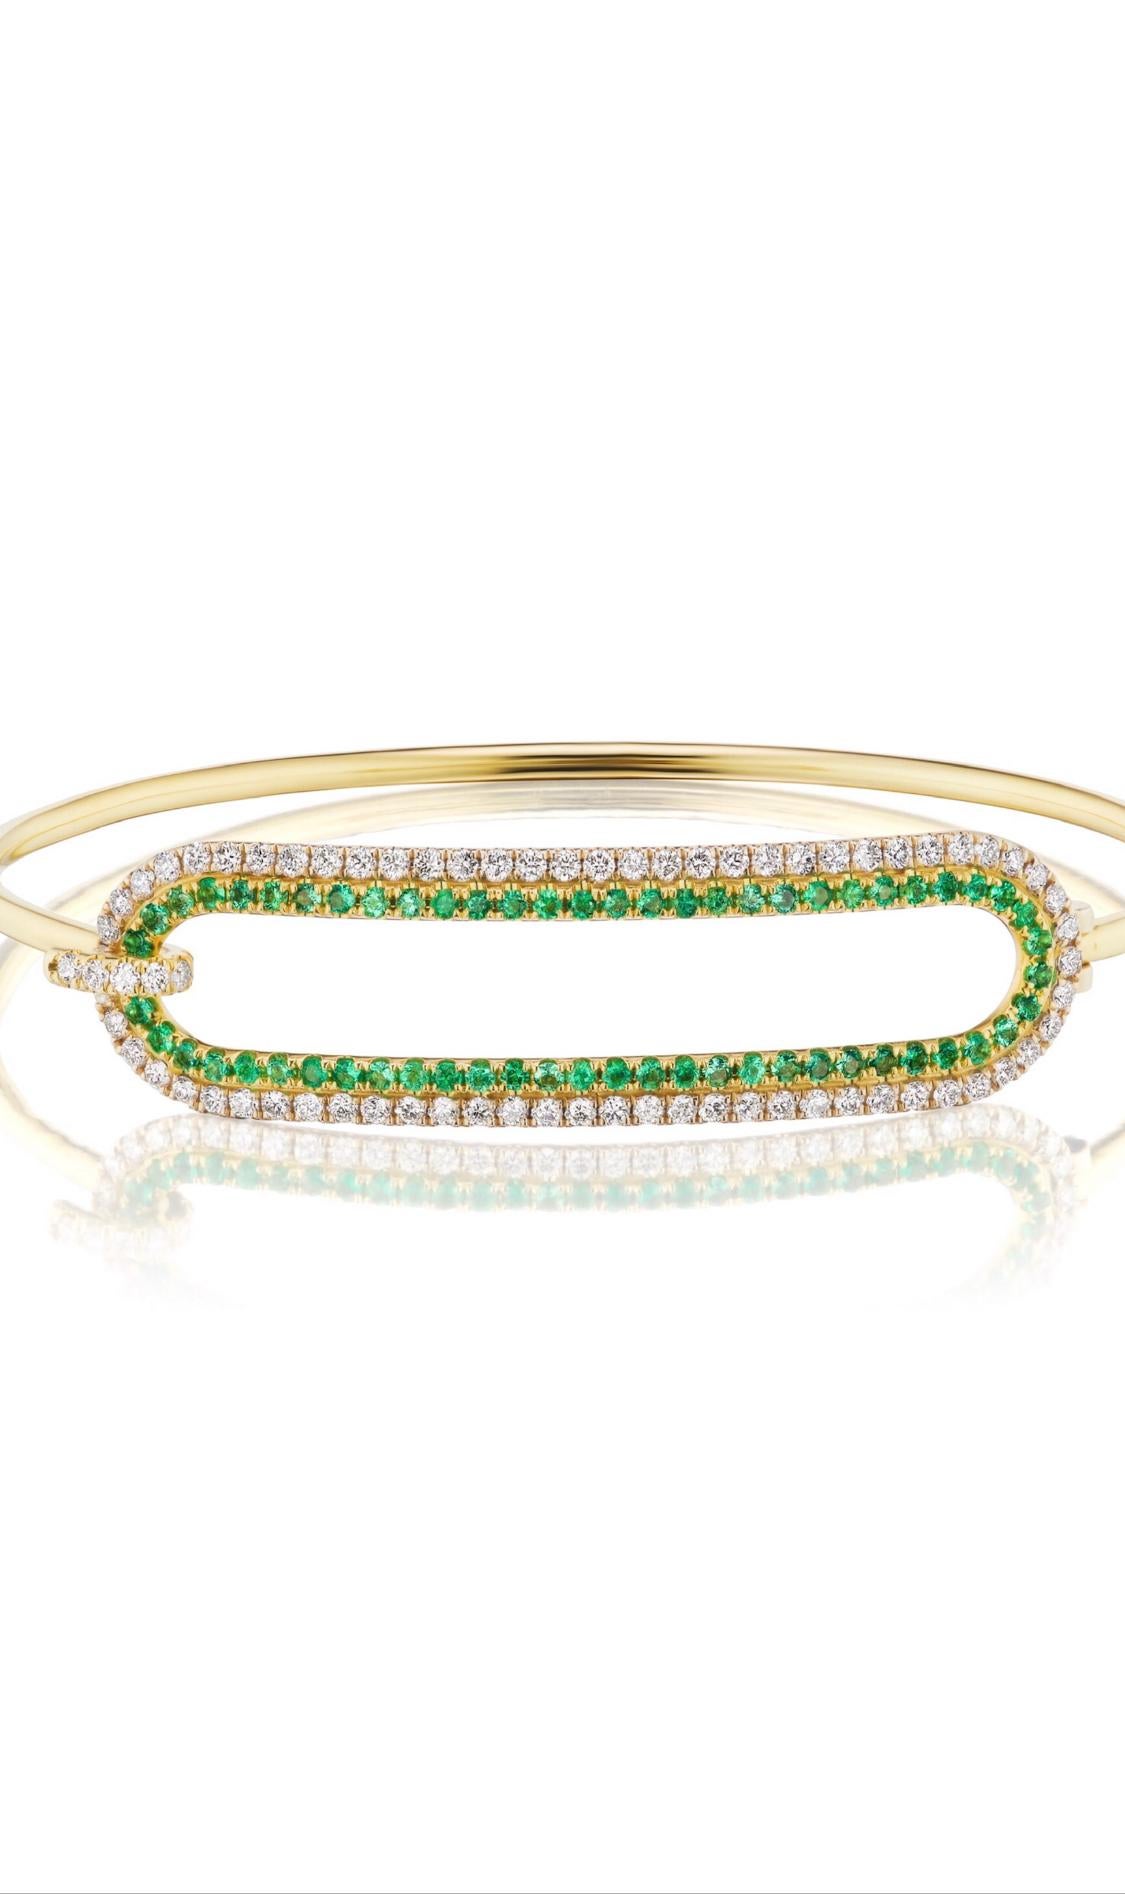 Round Cut Emerald and Diamond Tension Bracelet in 18 Karat Gold For Sale